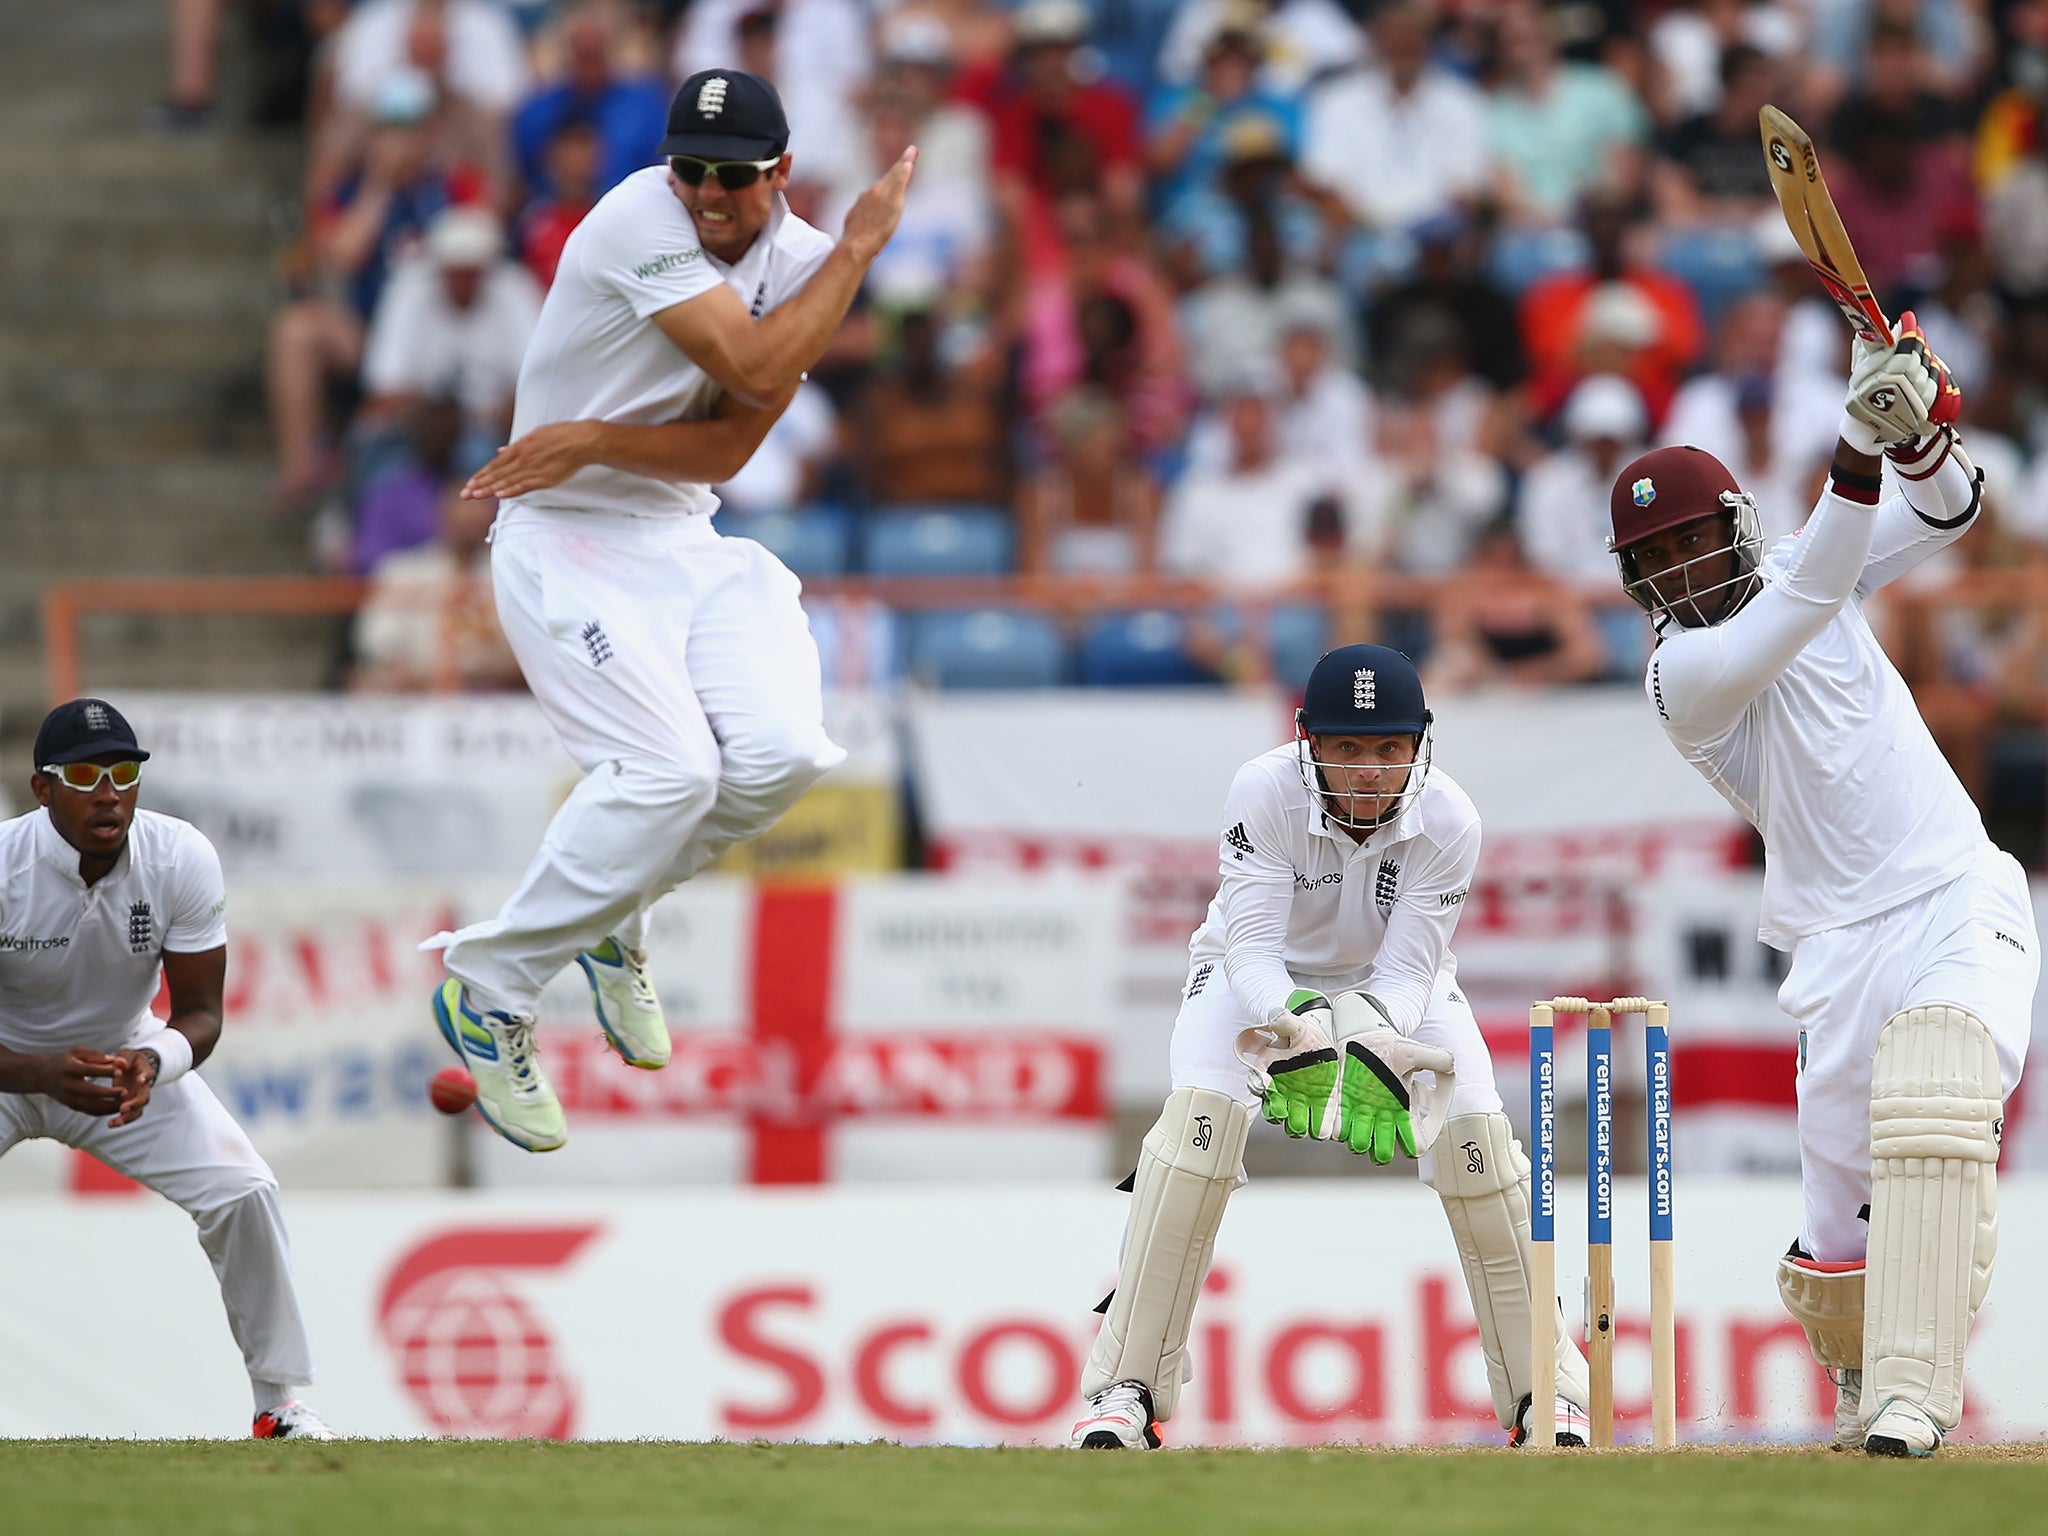 Alastair Cook of England leaps to avoid a cover drive from Marlon Samuels